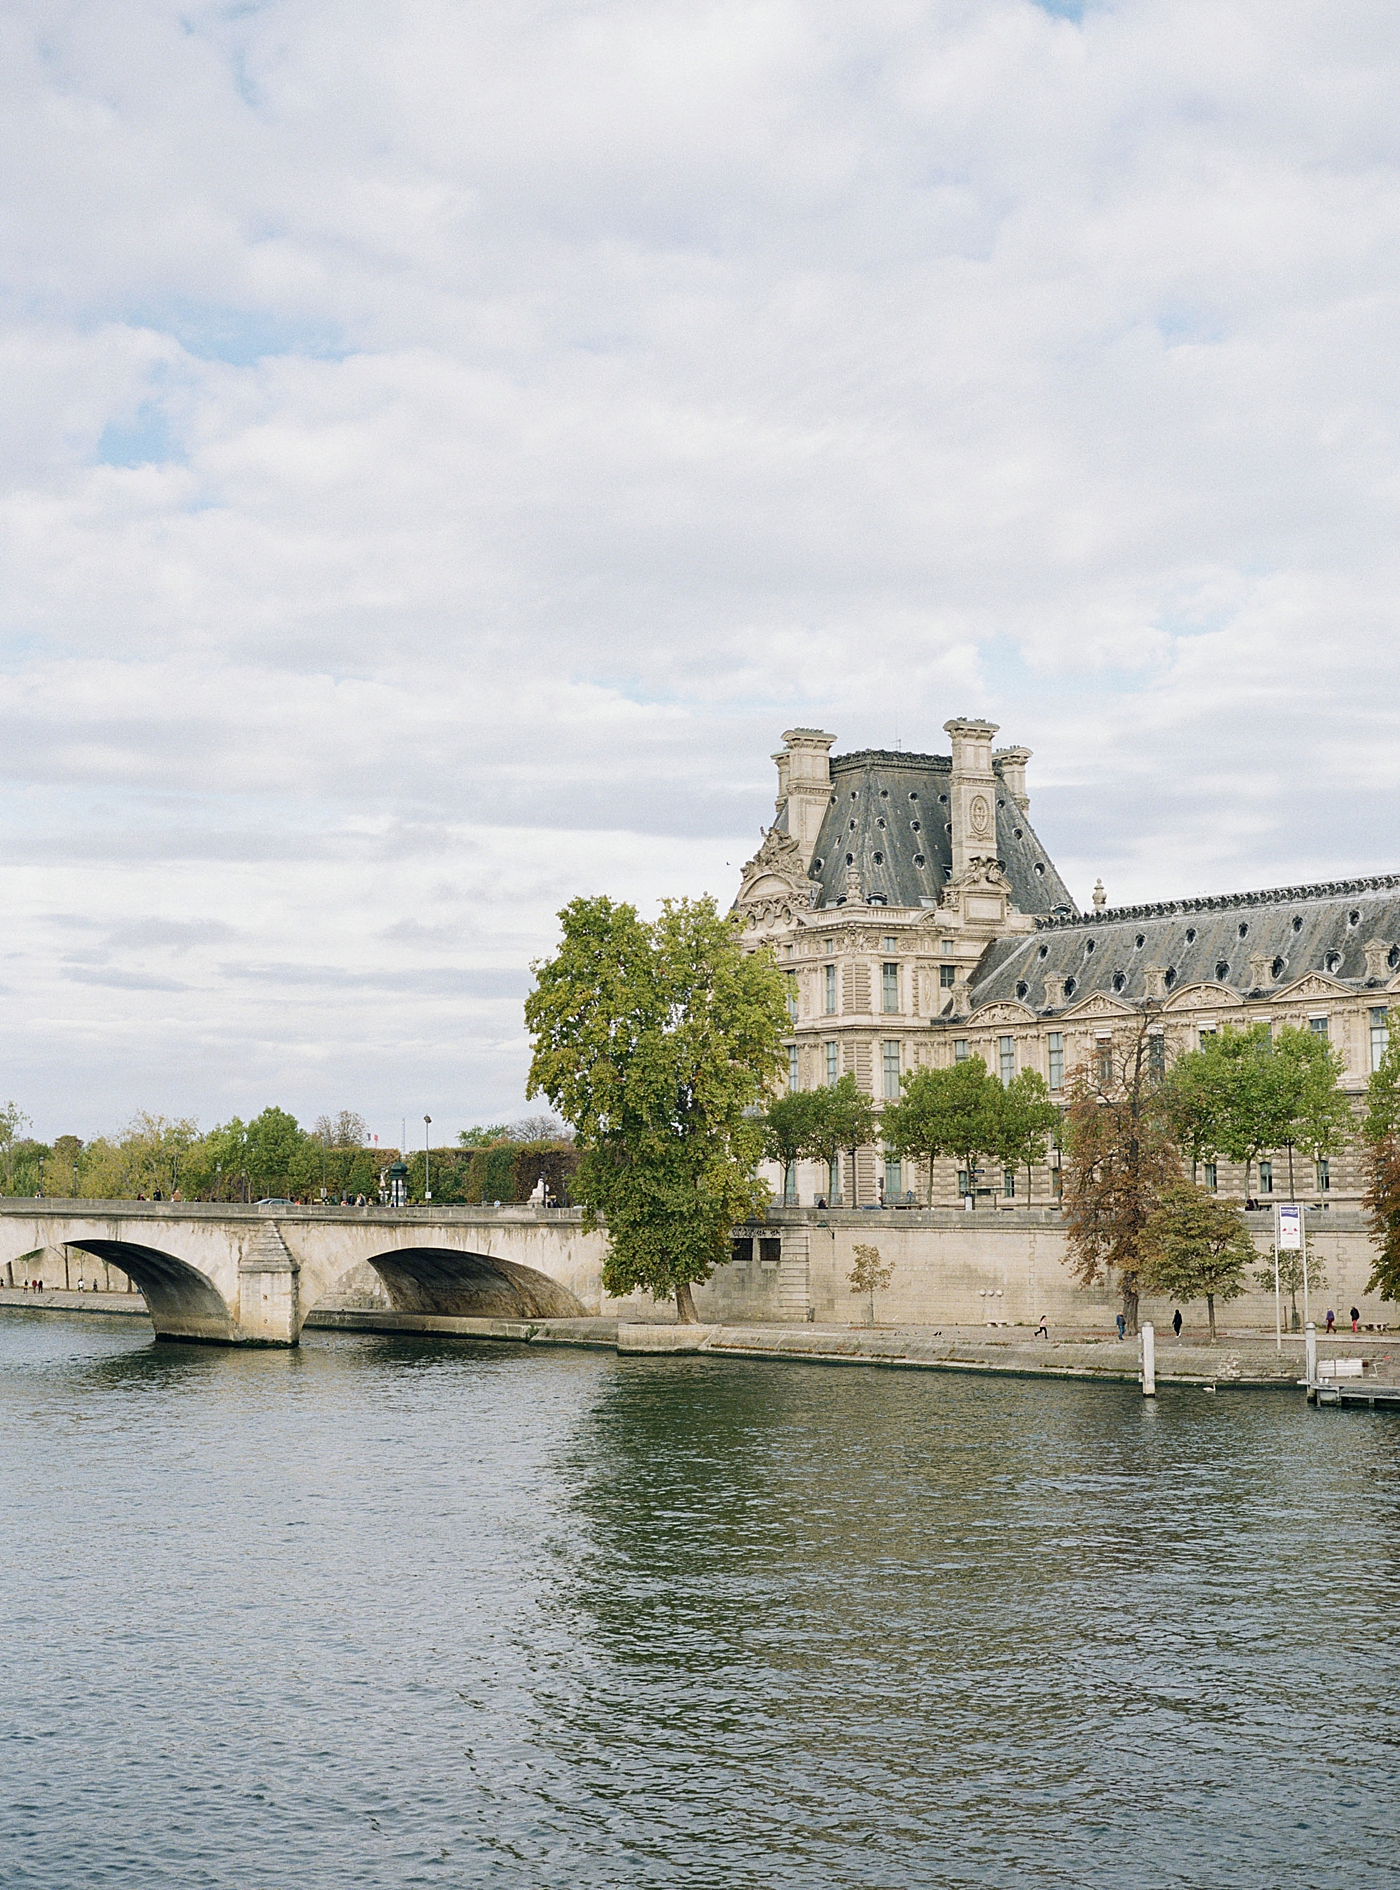 French building across a canal with a bridge | Image by Hope Helmuth Photography